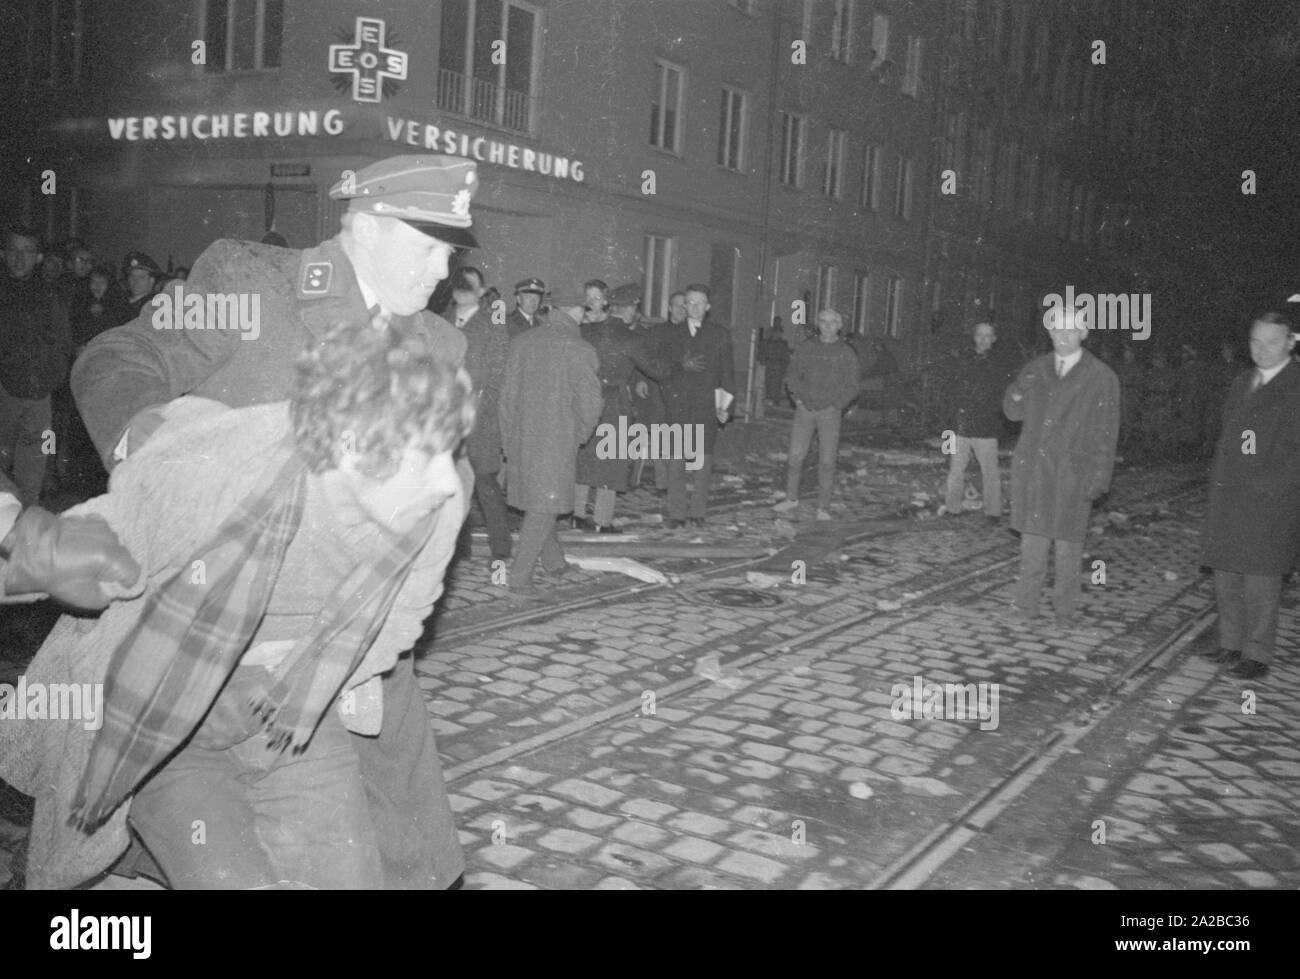 After the assassination attempt on Rudi Dutschke, actions took place against the Springer publishing house throughout Germany on the Easter weekend 1968. In Munich, demonstrators try to stop the delivery of the Bild-Zeitung through the barricade of the Munich bookshop on Schellingstrasse (either 12.04 or 15.04.). In the picture: policemen lead away a demonstrator. Stock Photo